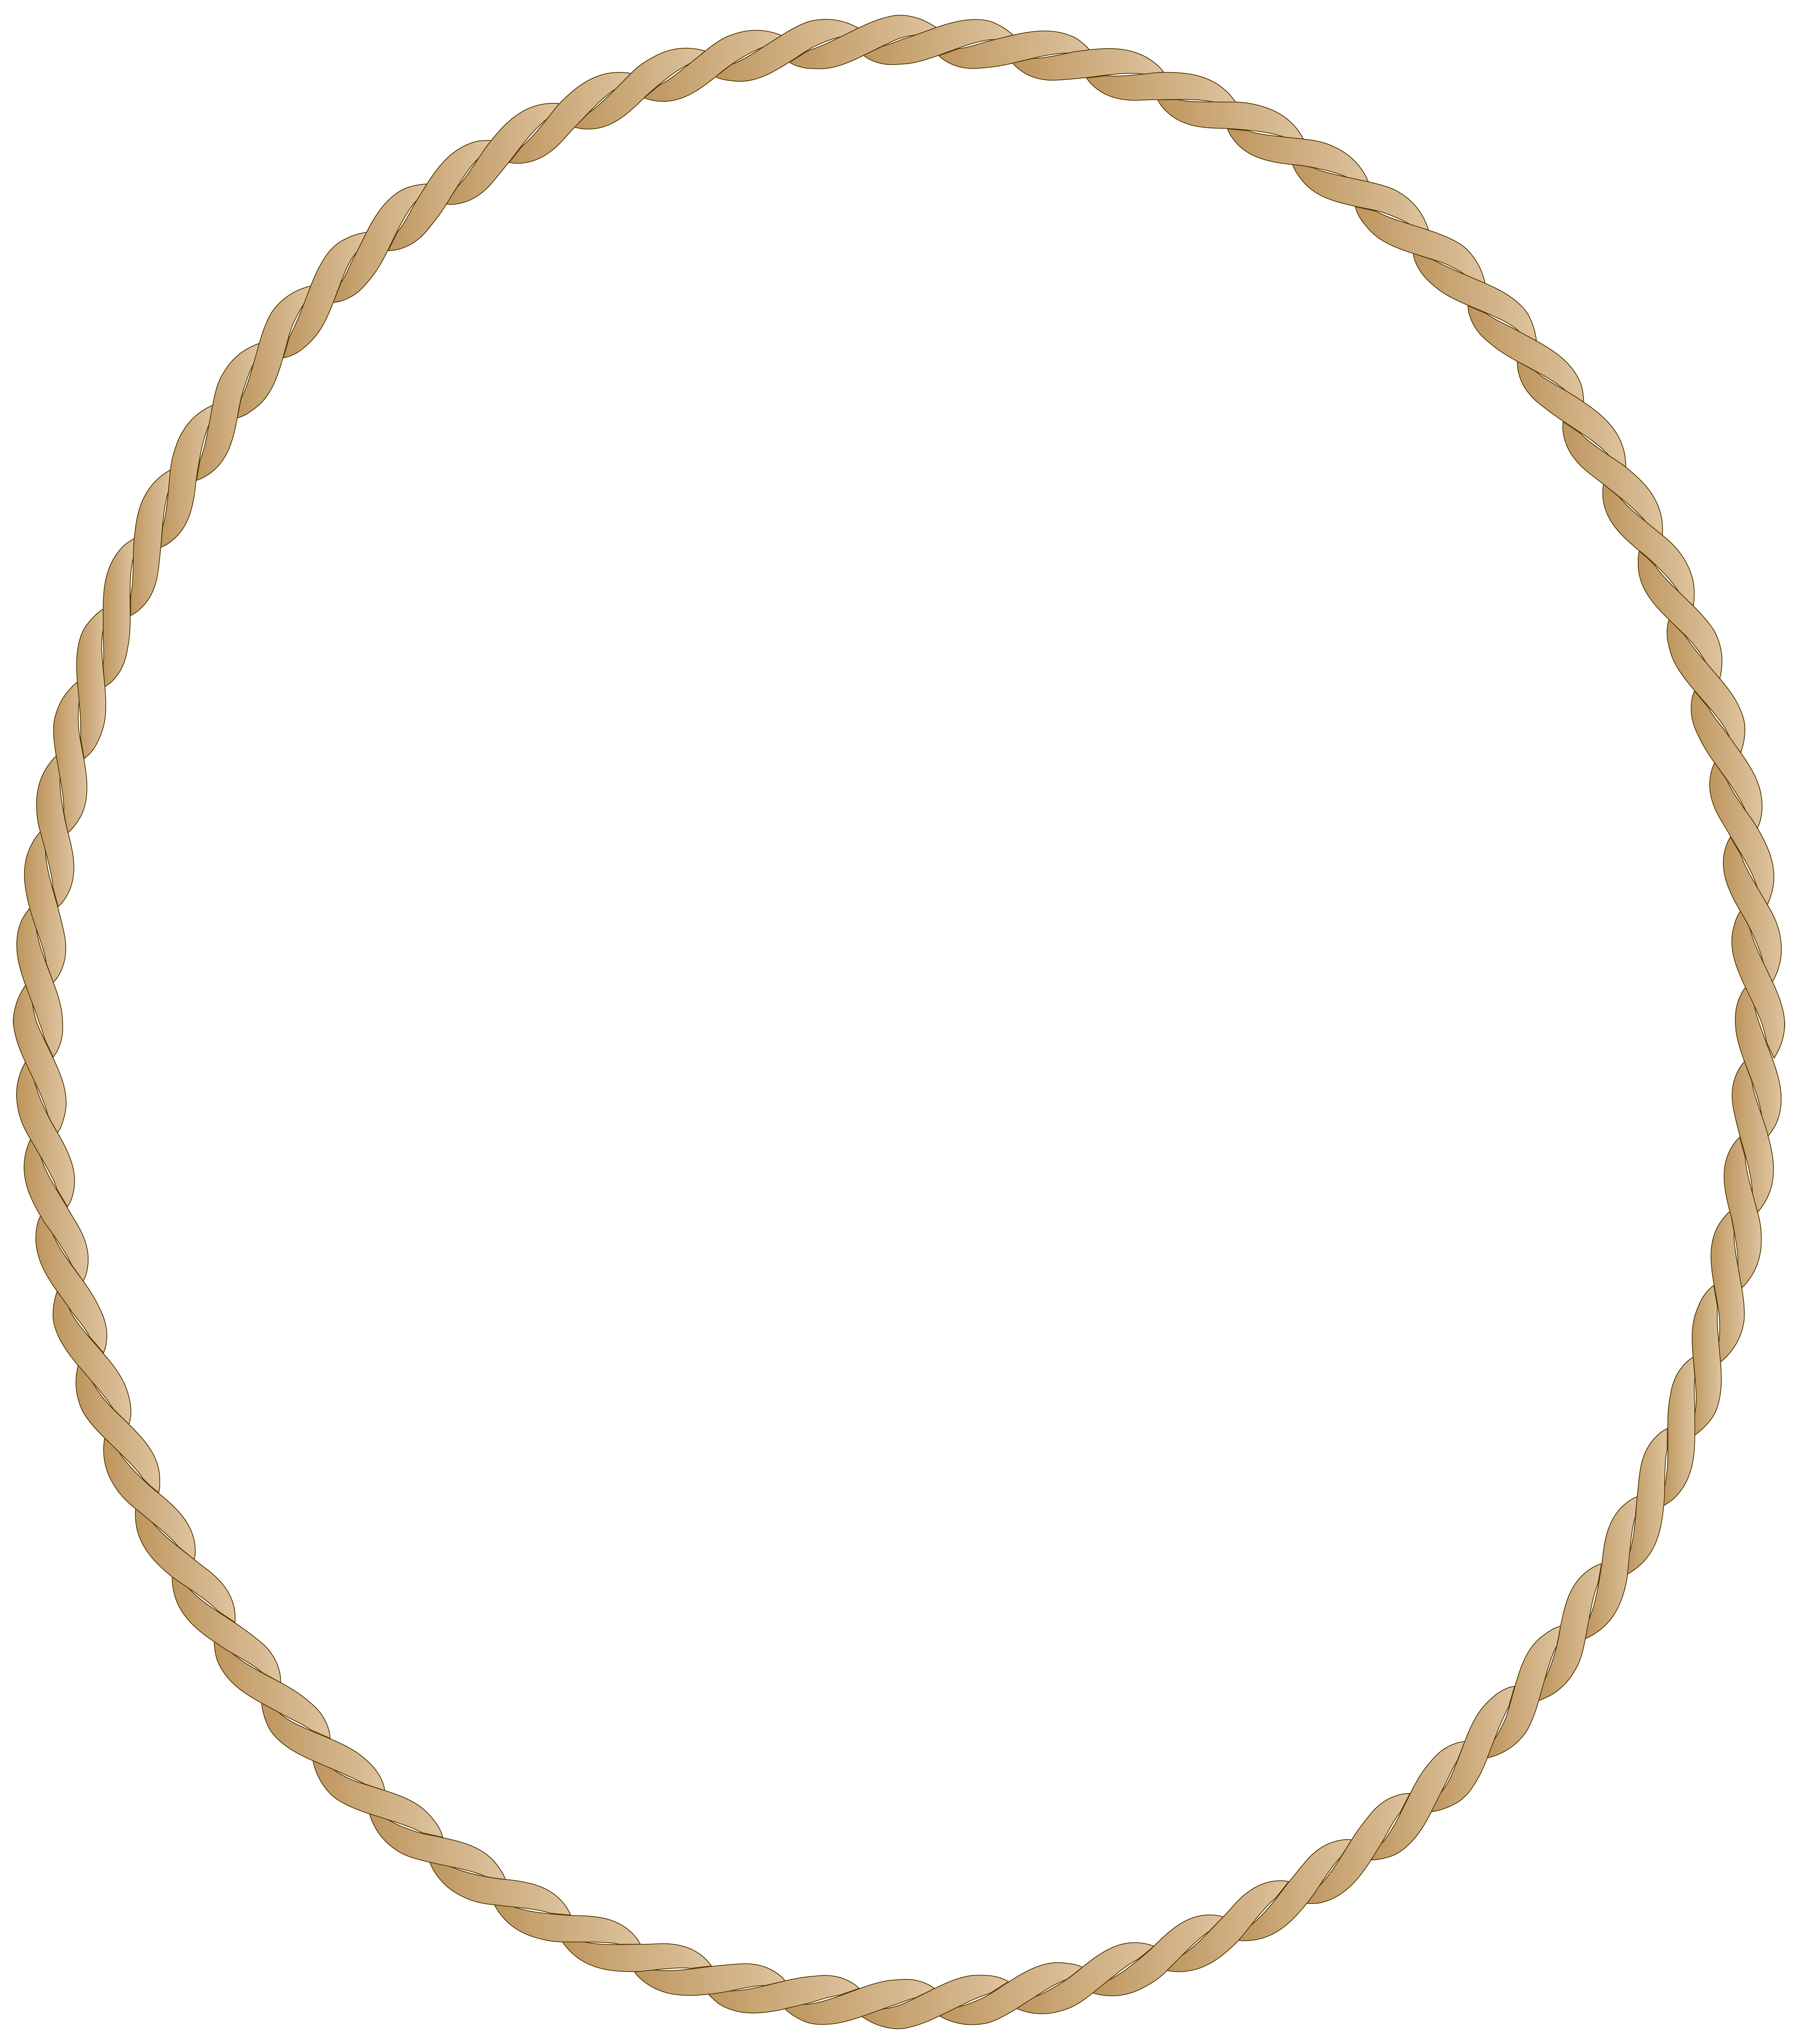 oval clipart